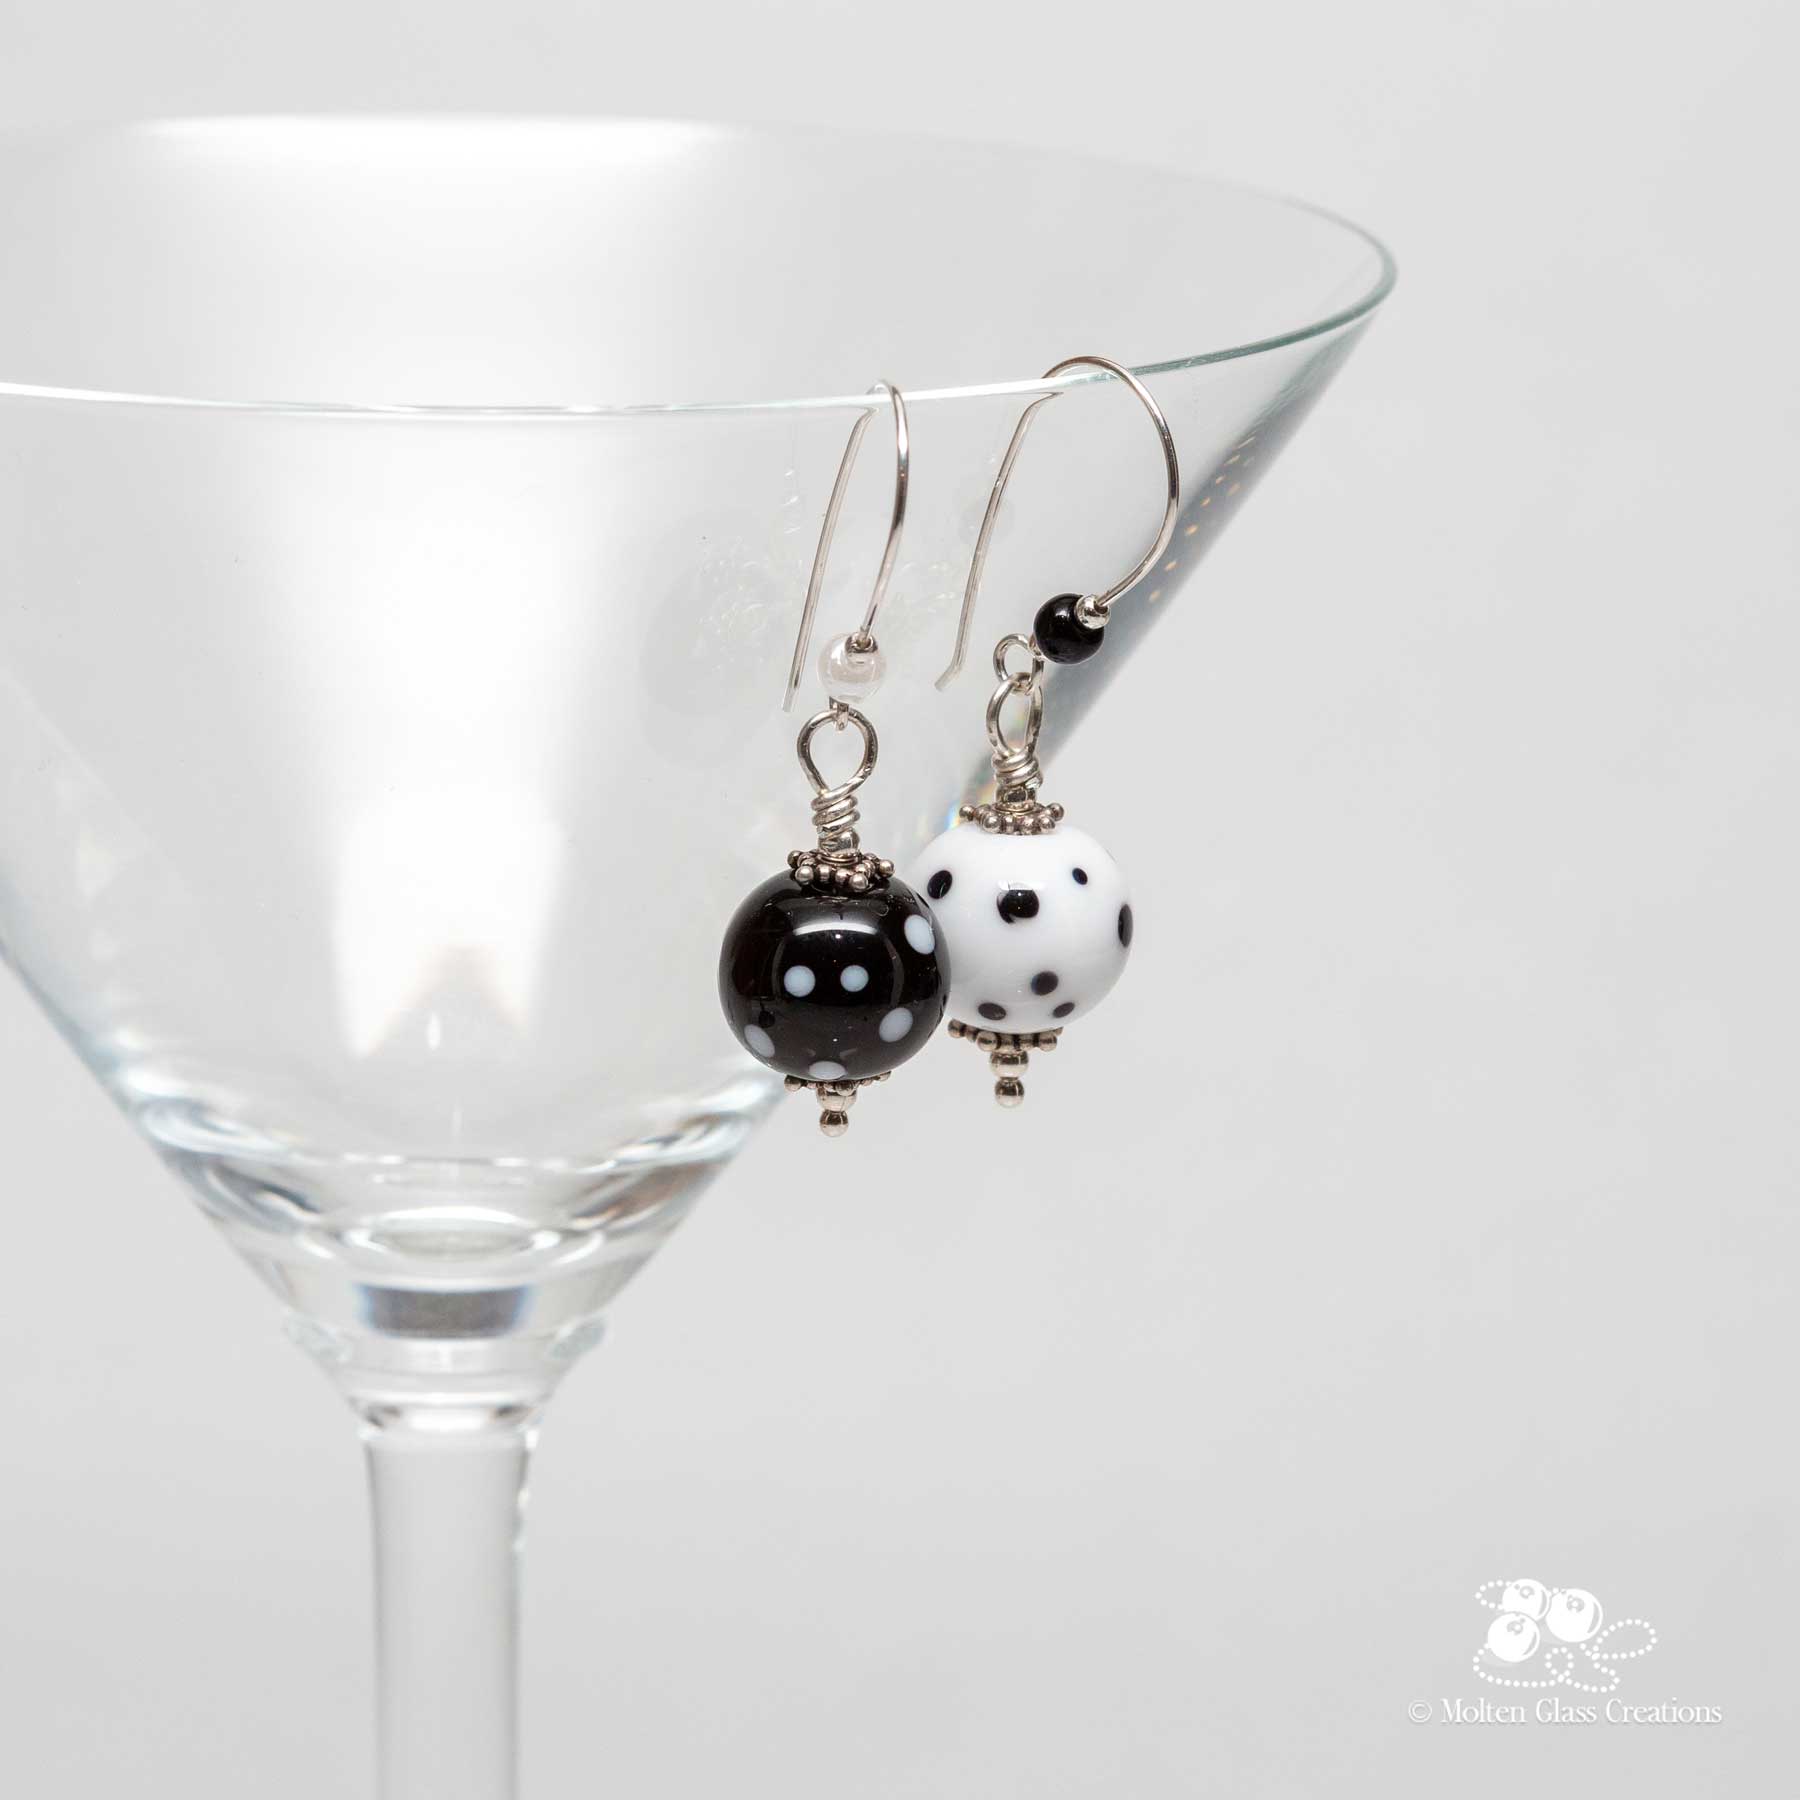 Mismatched Black & White Polka Dot Earrings - Molten Glass Creations